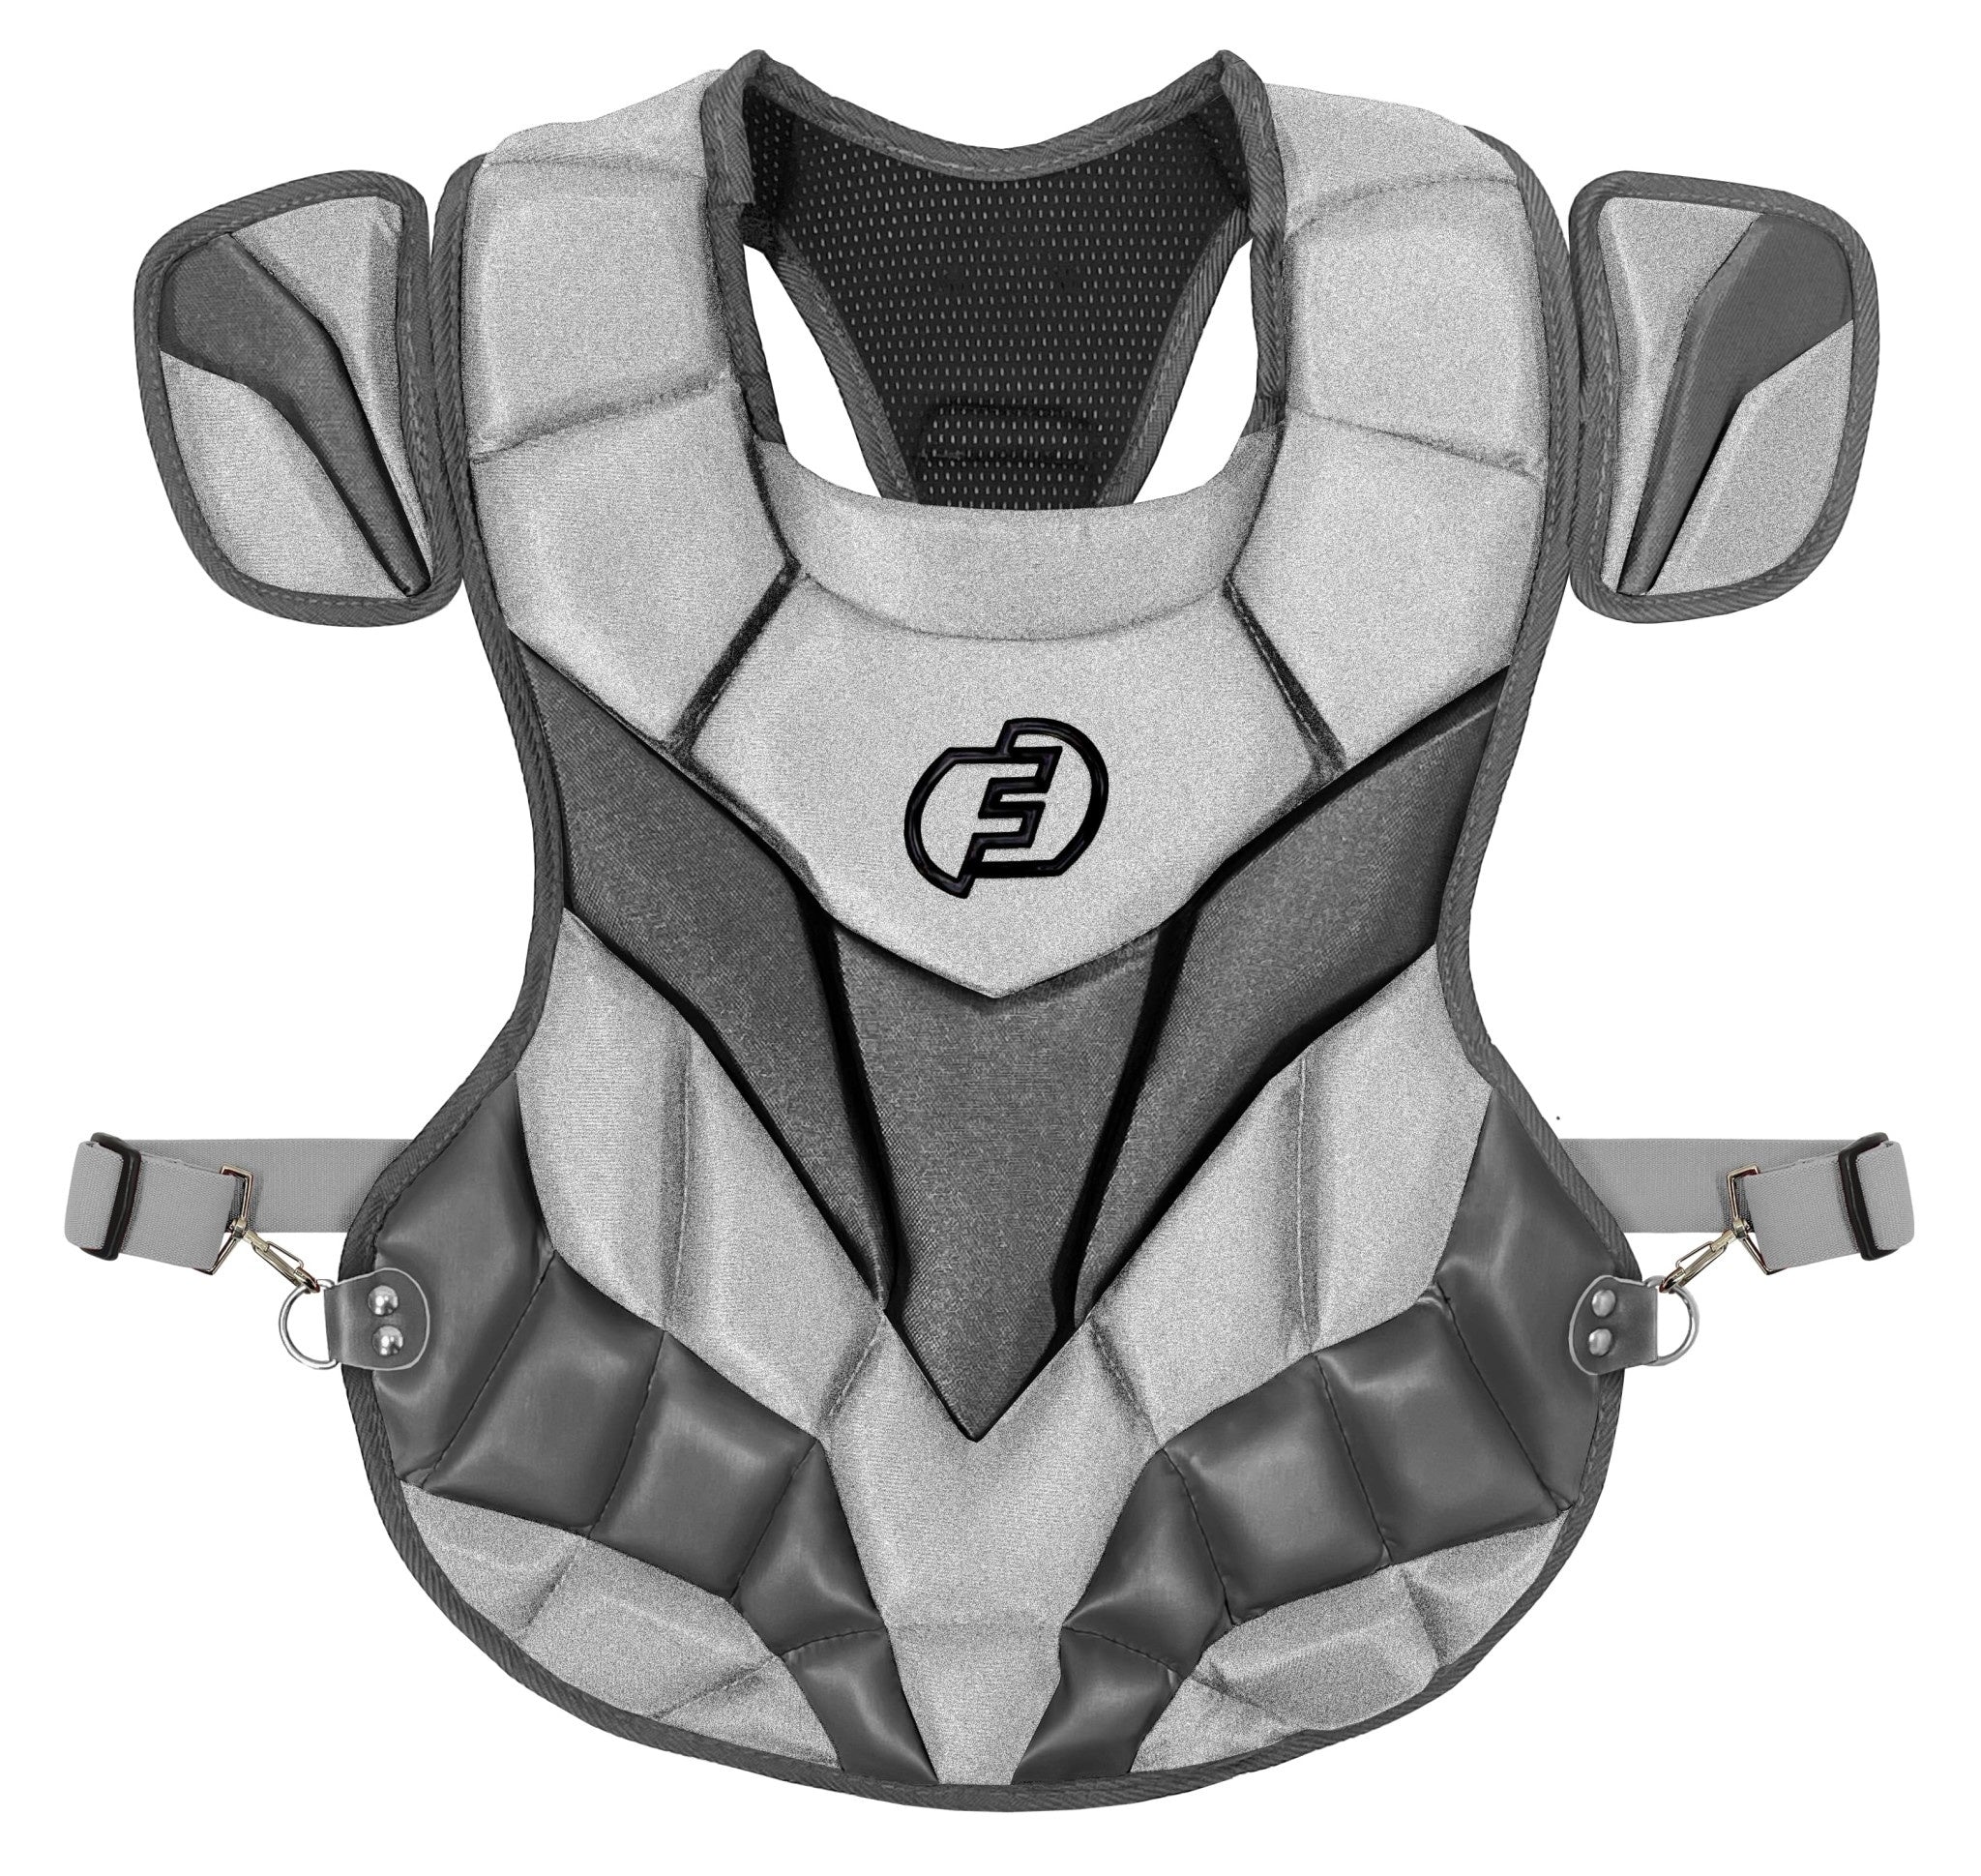 Force 3 Adult Chest Protector Grey